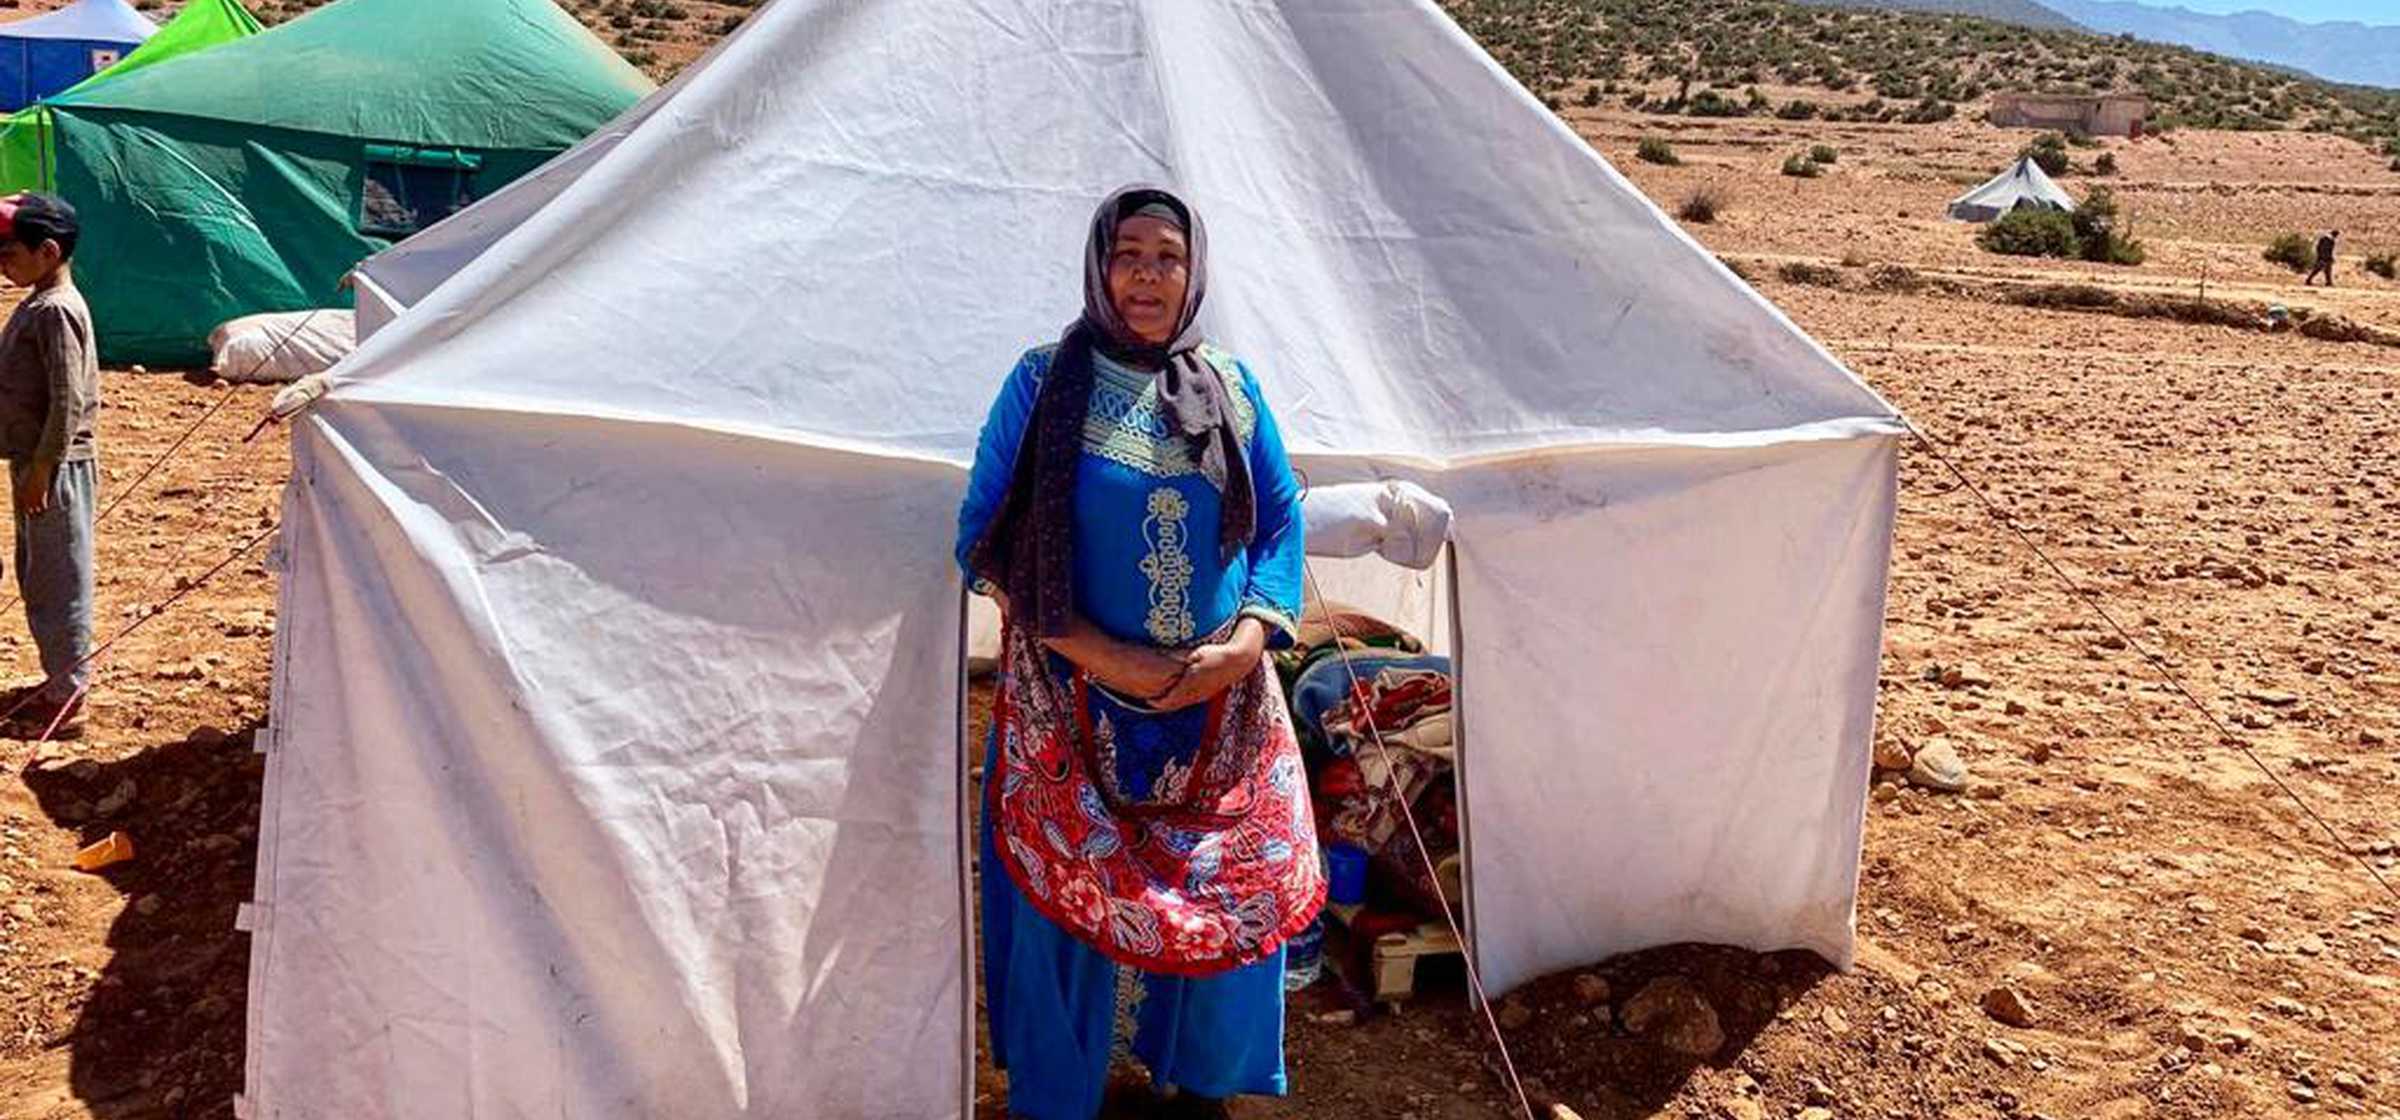 Aicha 61 with her new tent Taoukarte 01.jpeg